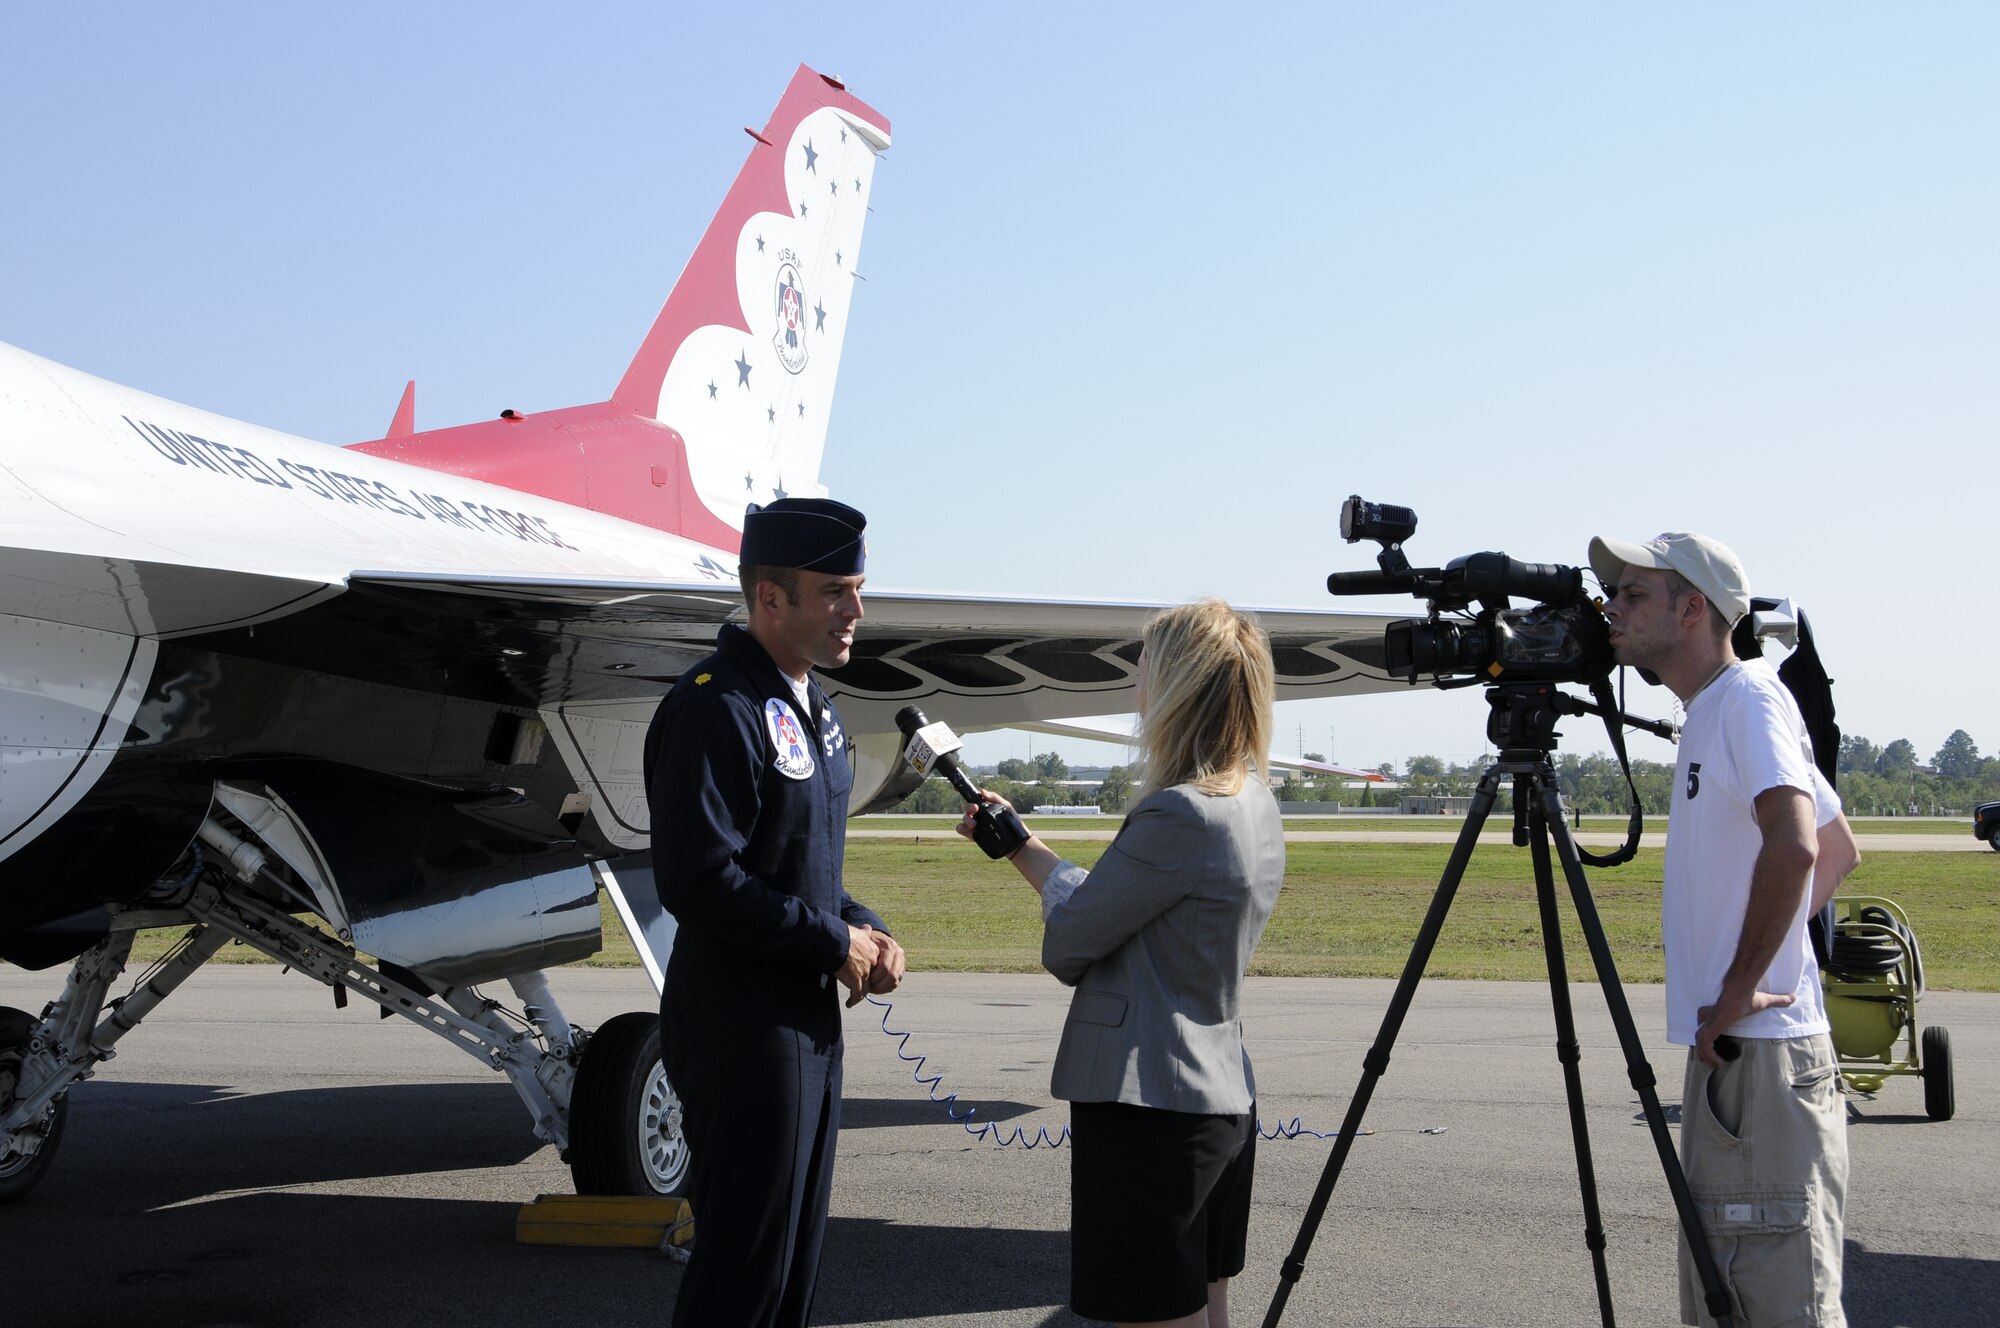 Maj. Aaron Jelinek, lead solo pilot with the U.S. Air Force Thunderbird Demonstration Squadron, speaks with members of the media at the 188th Fighter Wing. The Thunderbirds arrived in Fort Smith Sept. 29 in preparation for the Fort Smith Air Show scheduled for Oct. 1-2. (U.S. Air Force photo by Airman 1st Class Hannah Landeros)